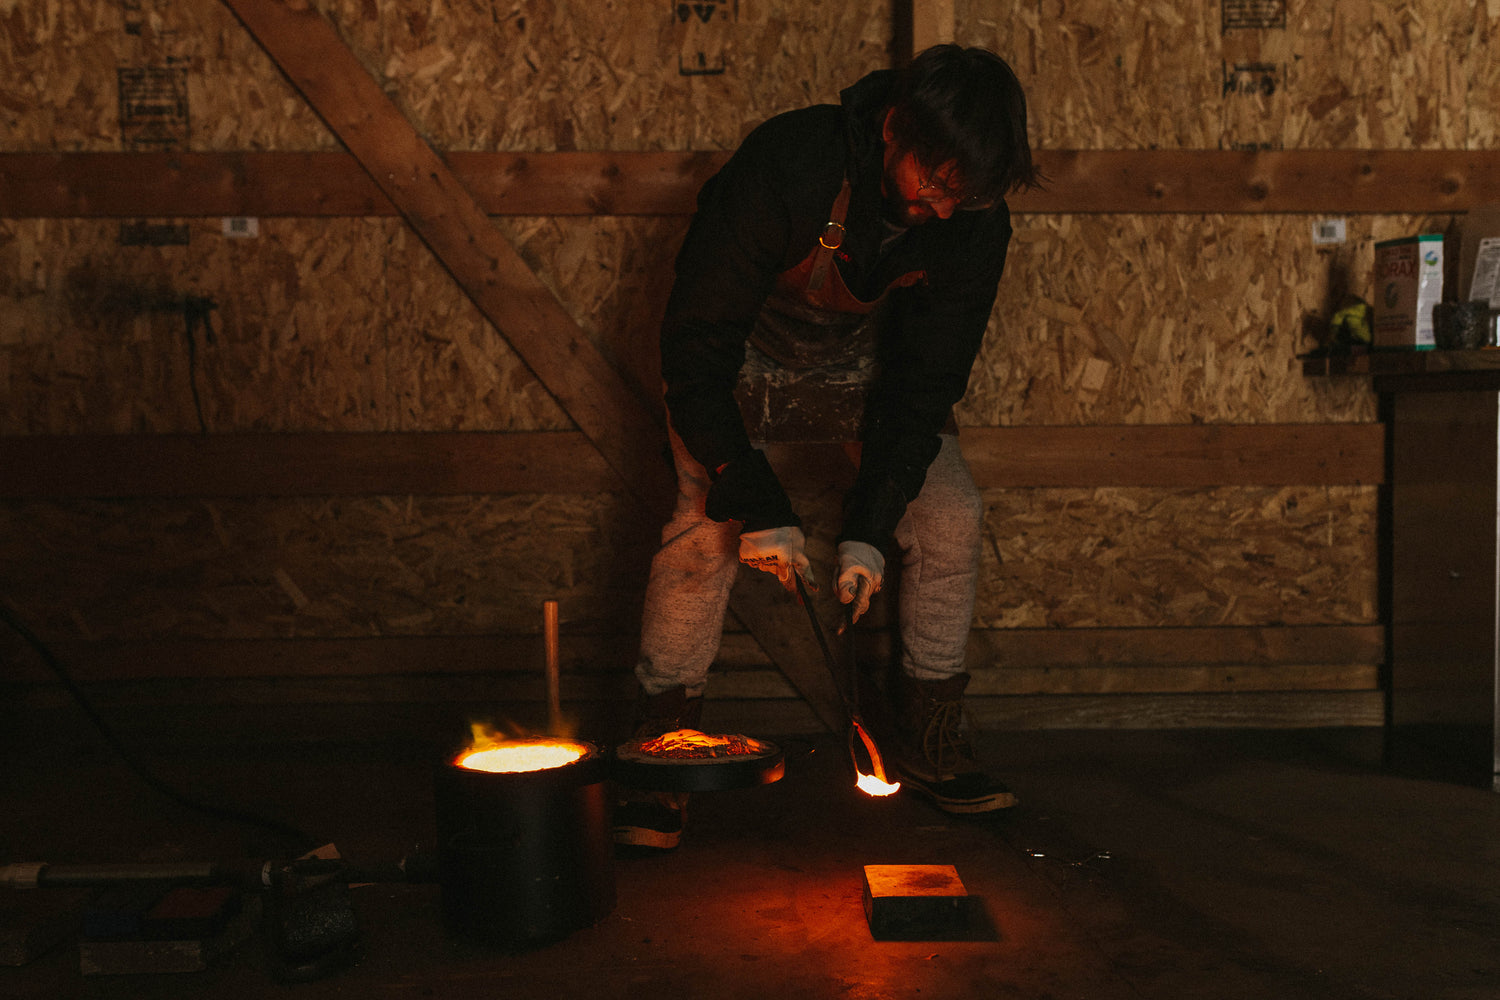 This is a picture of me (the ring maker) using my forge